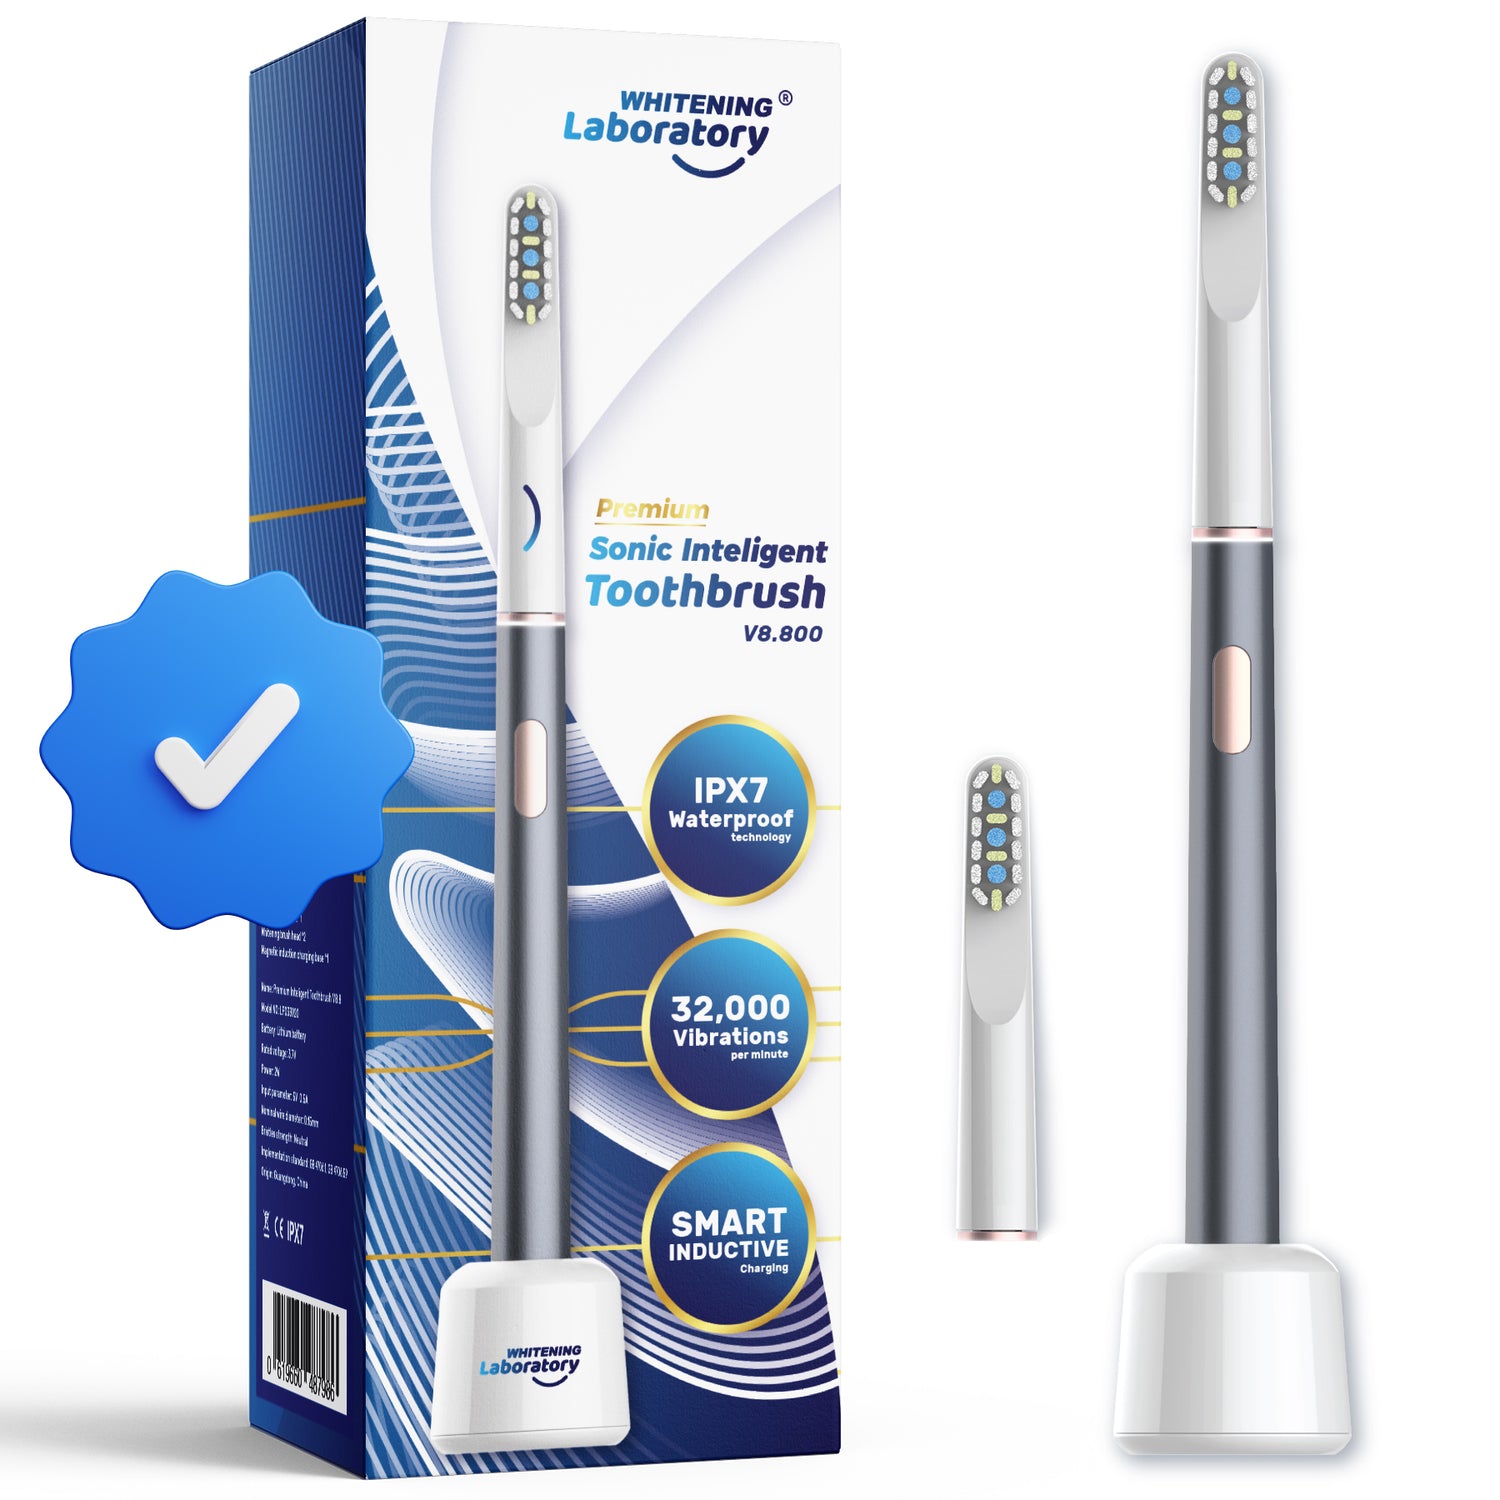 Premium Sonic Toothbrush from Whitening Laboratory for effective cleaning and a brighter smile.